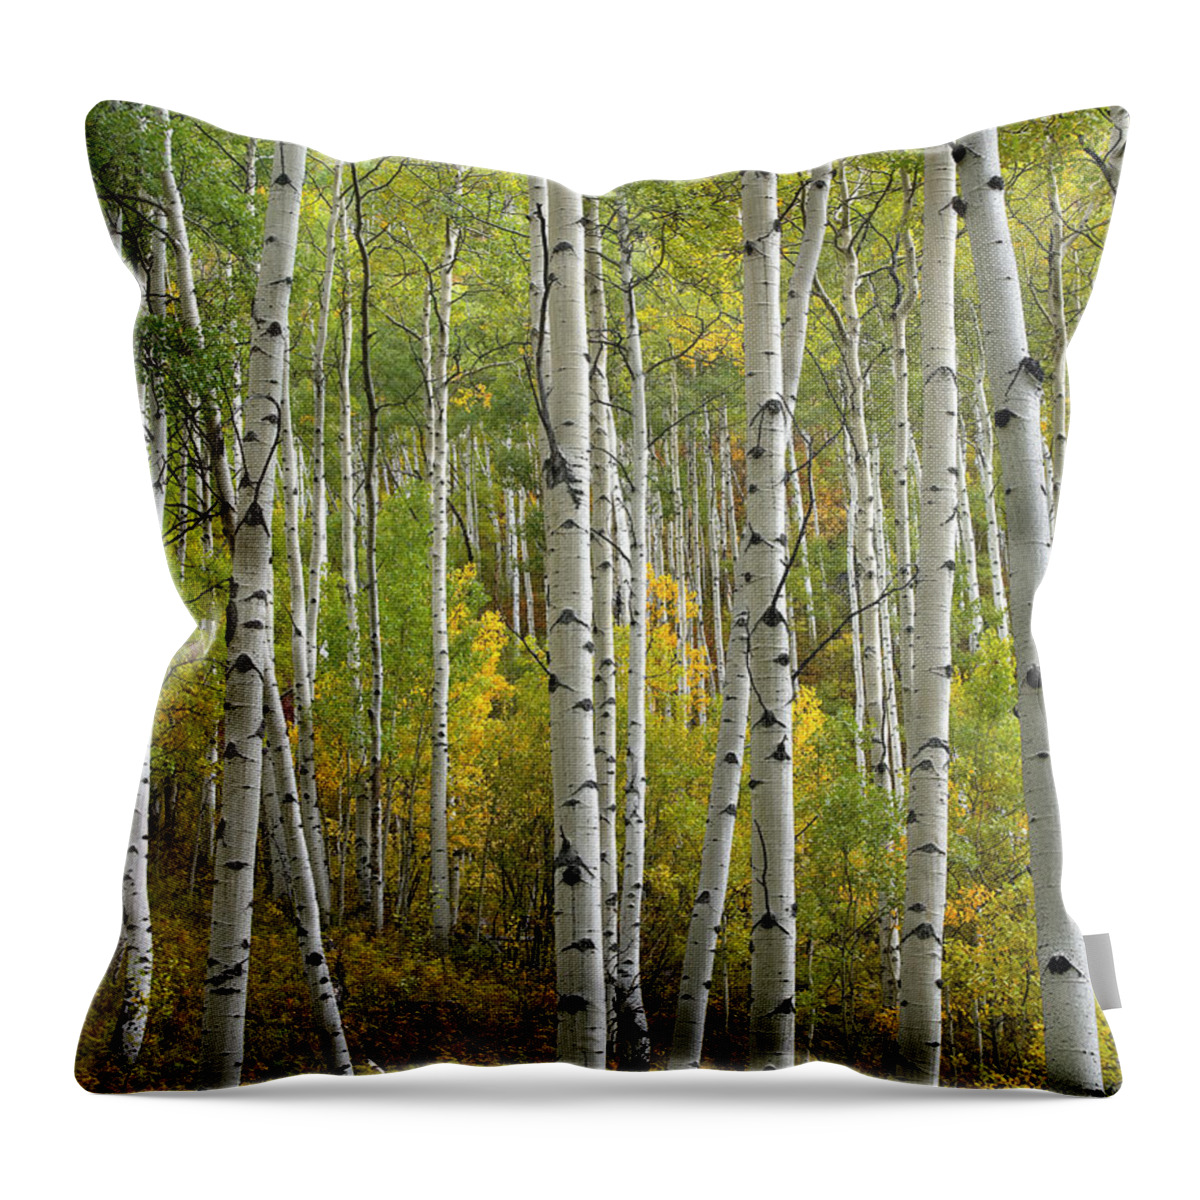 00175145 Throw Pillow featuring the photograph Quaking Aspen Trees In Fall Colorado by Tim Fitzharris